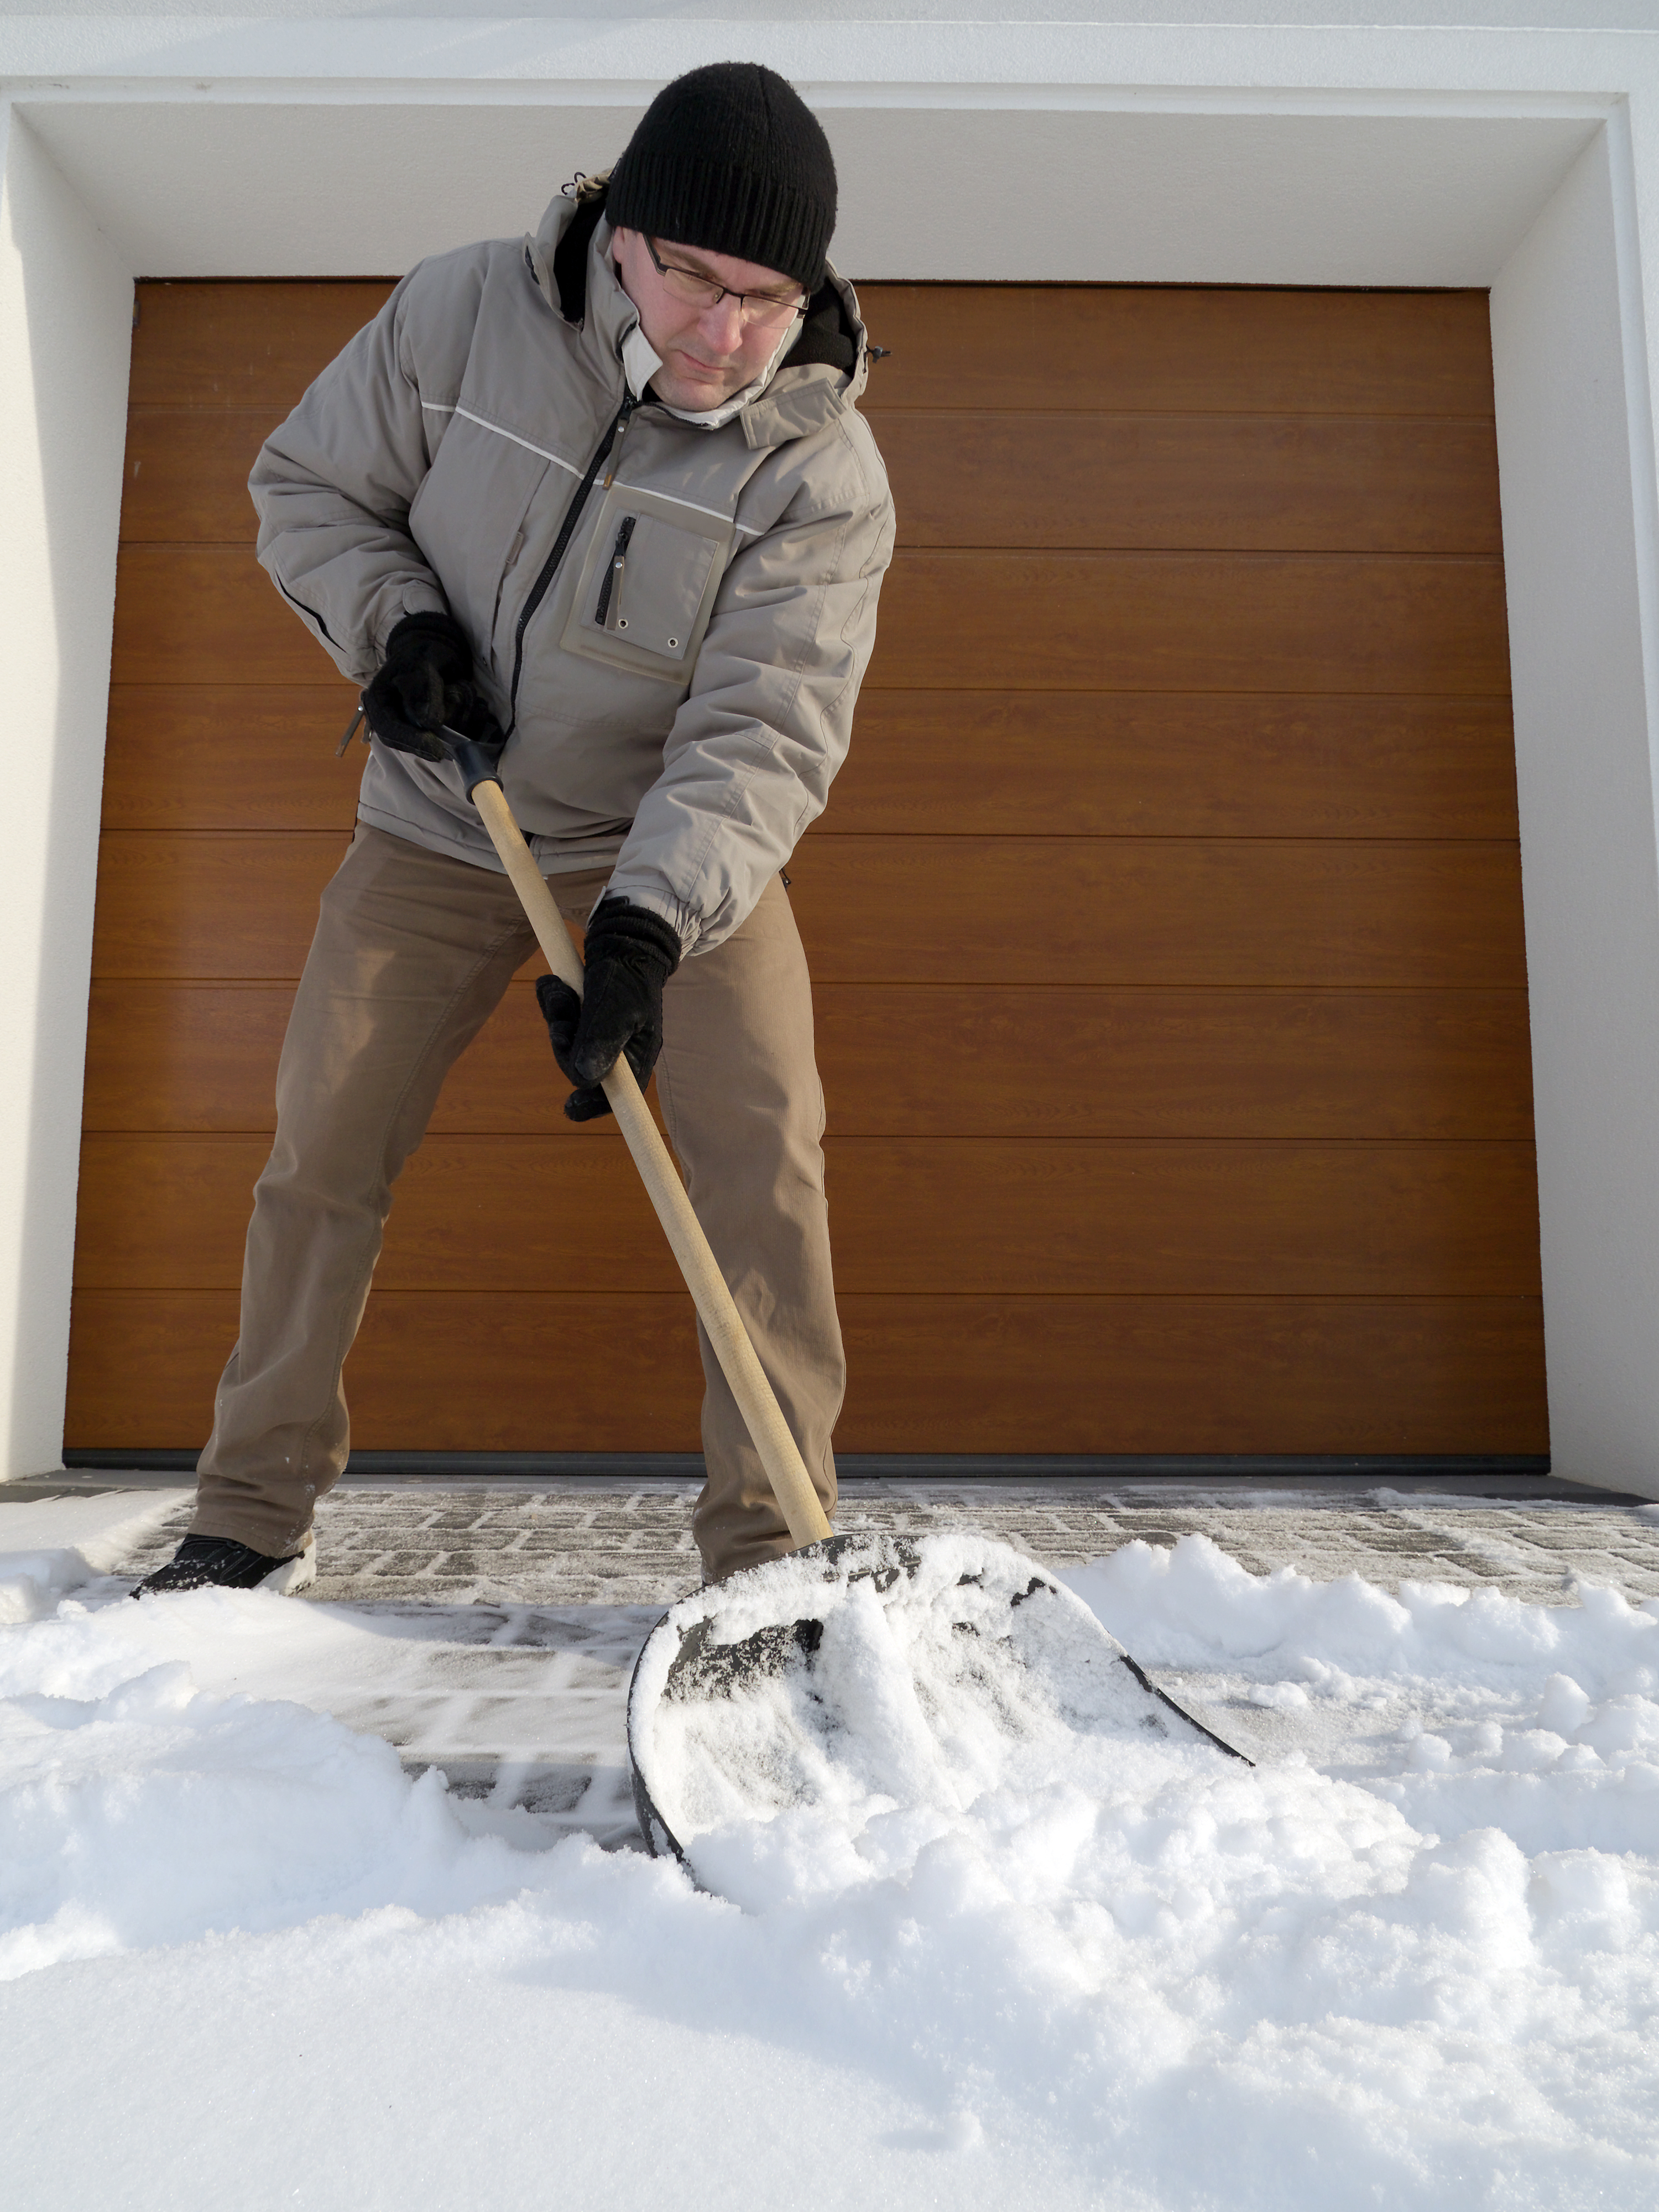 Cold and wet combine to affect metal, wood, and electronics. Take steps to ensure your overhead garage door continues to operate smoothly, whatever Mother Nature dishes out.